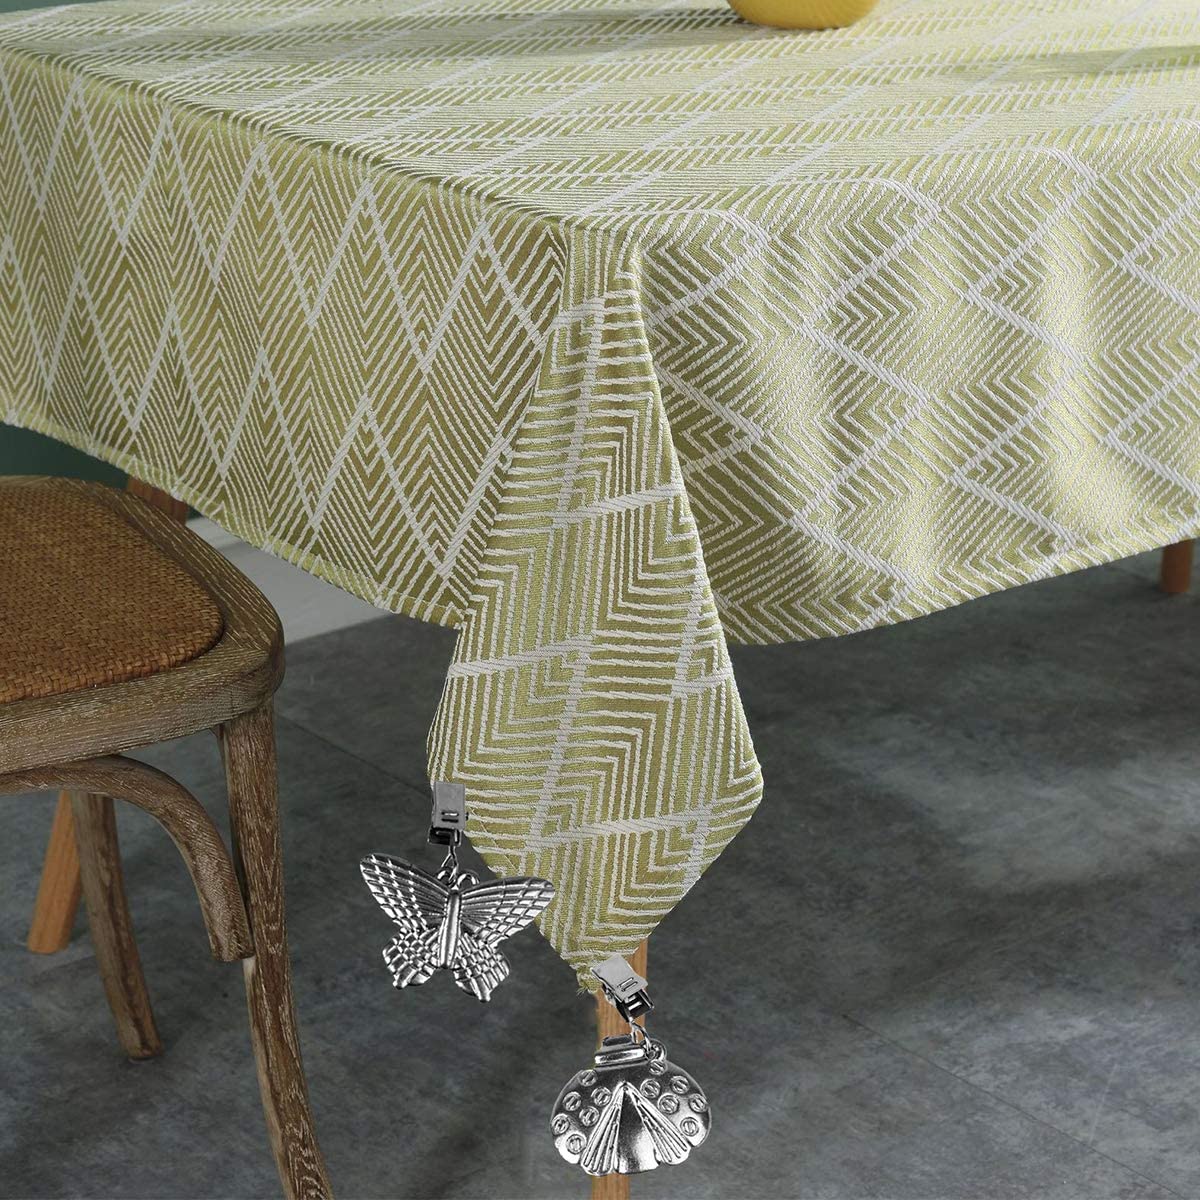 Banana Tablecloth Weights with Metal Clips for Outdoor Garden Party Picnic Table Covers